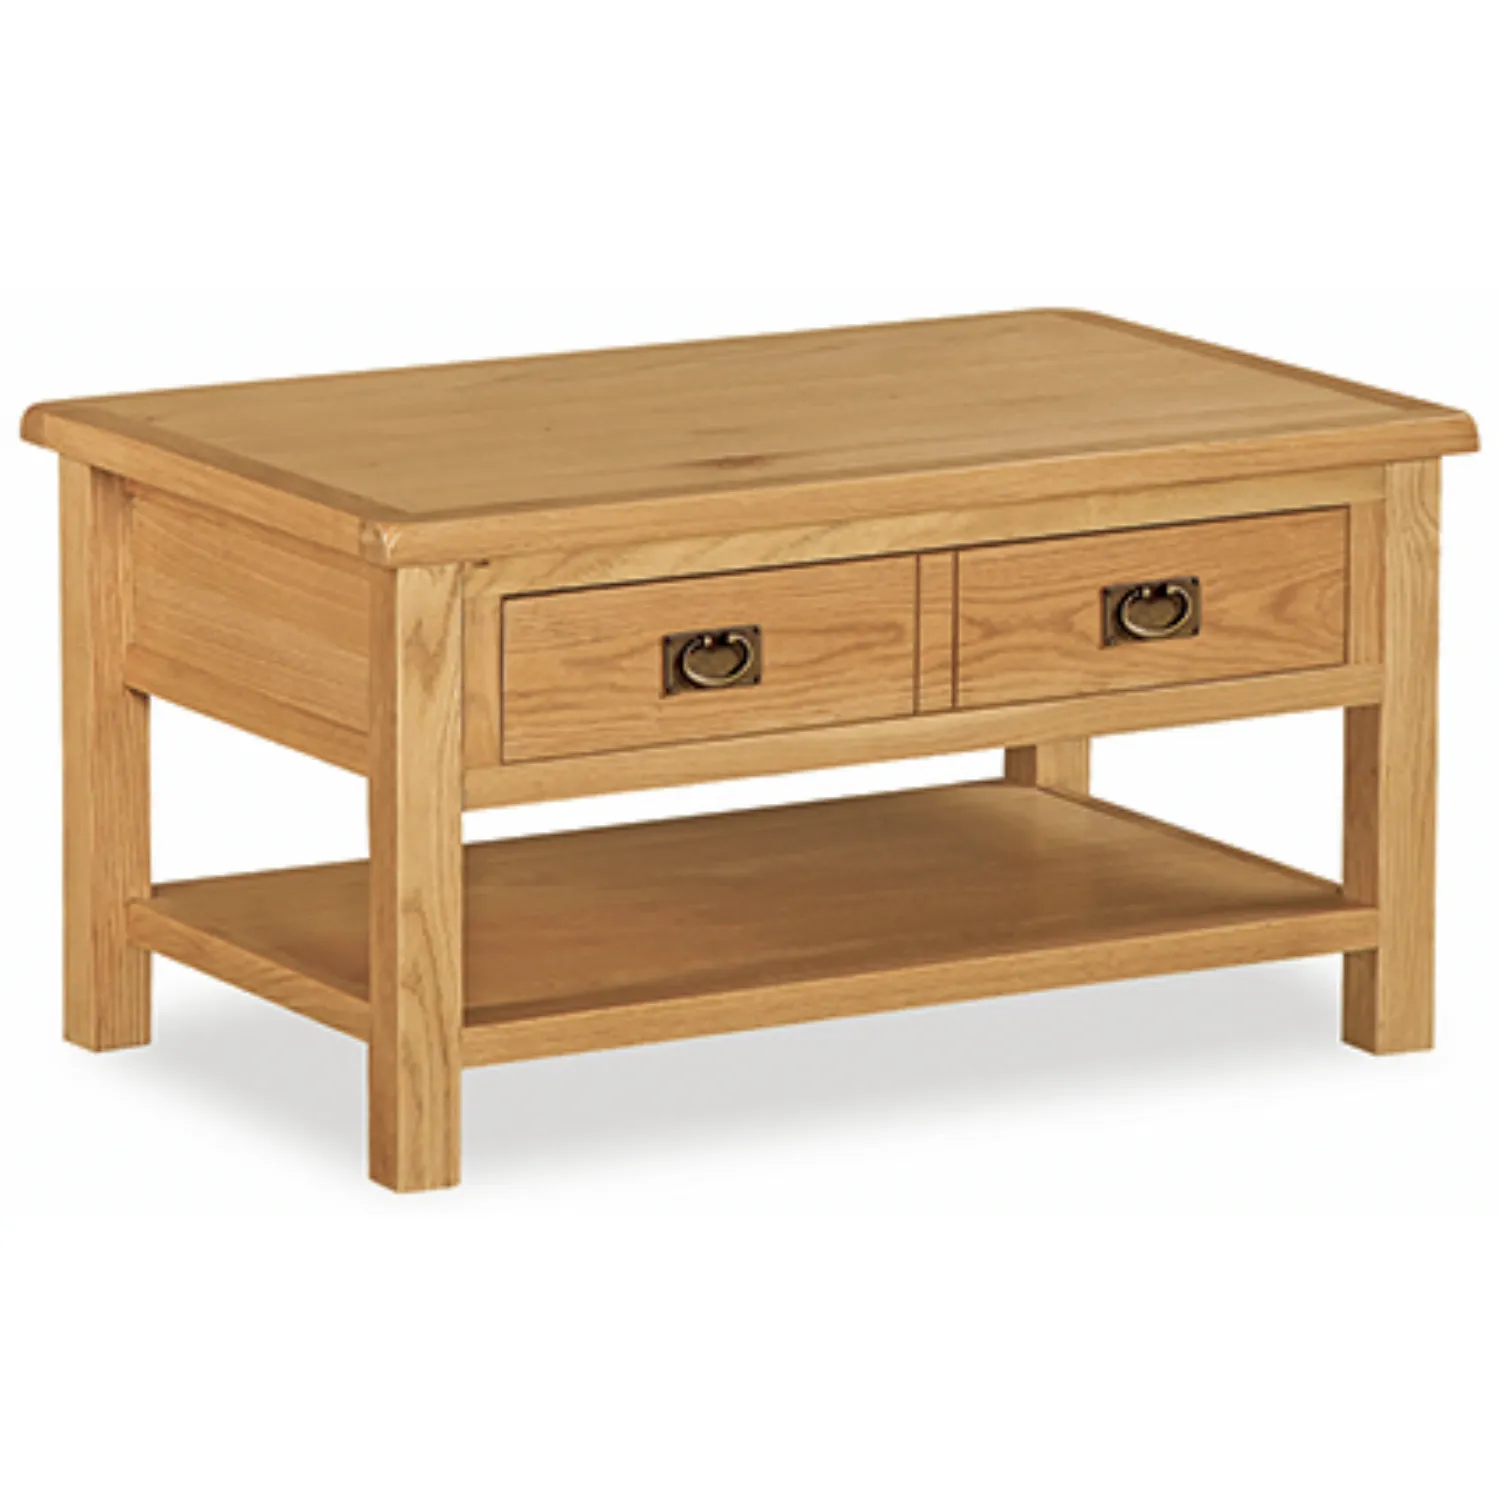 Light Oak Coffee Table with Drawer and Shelf